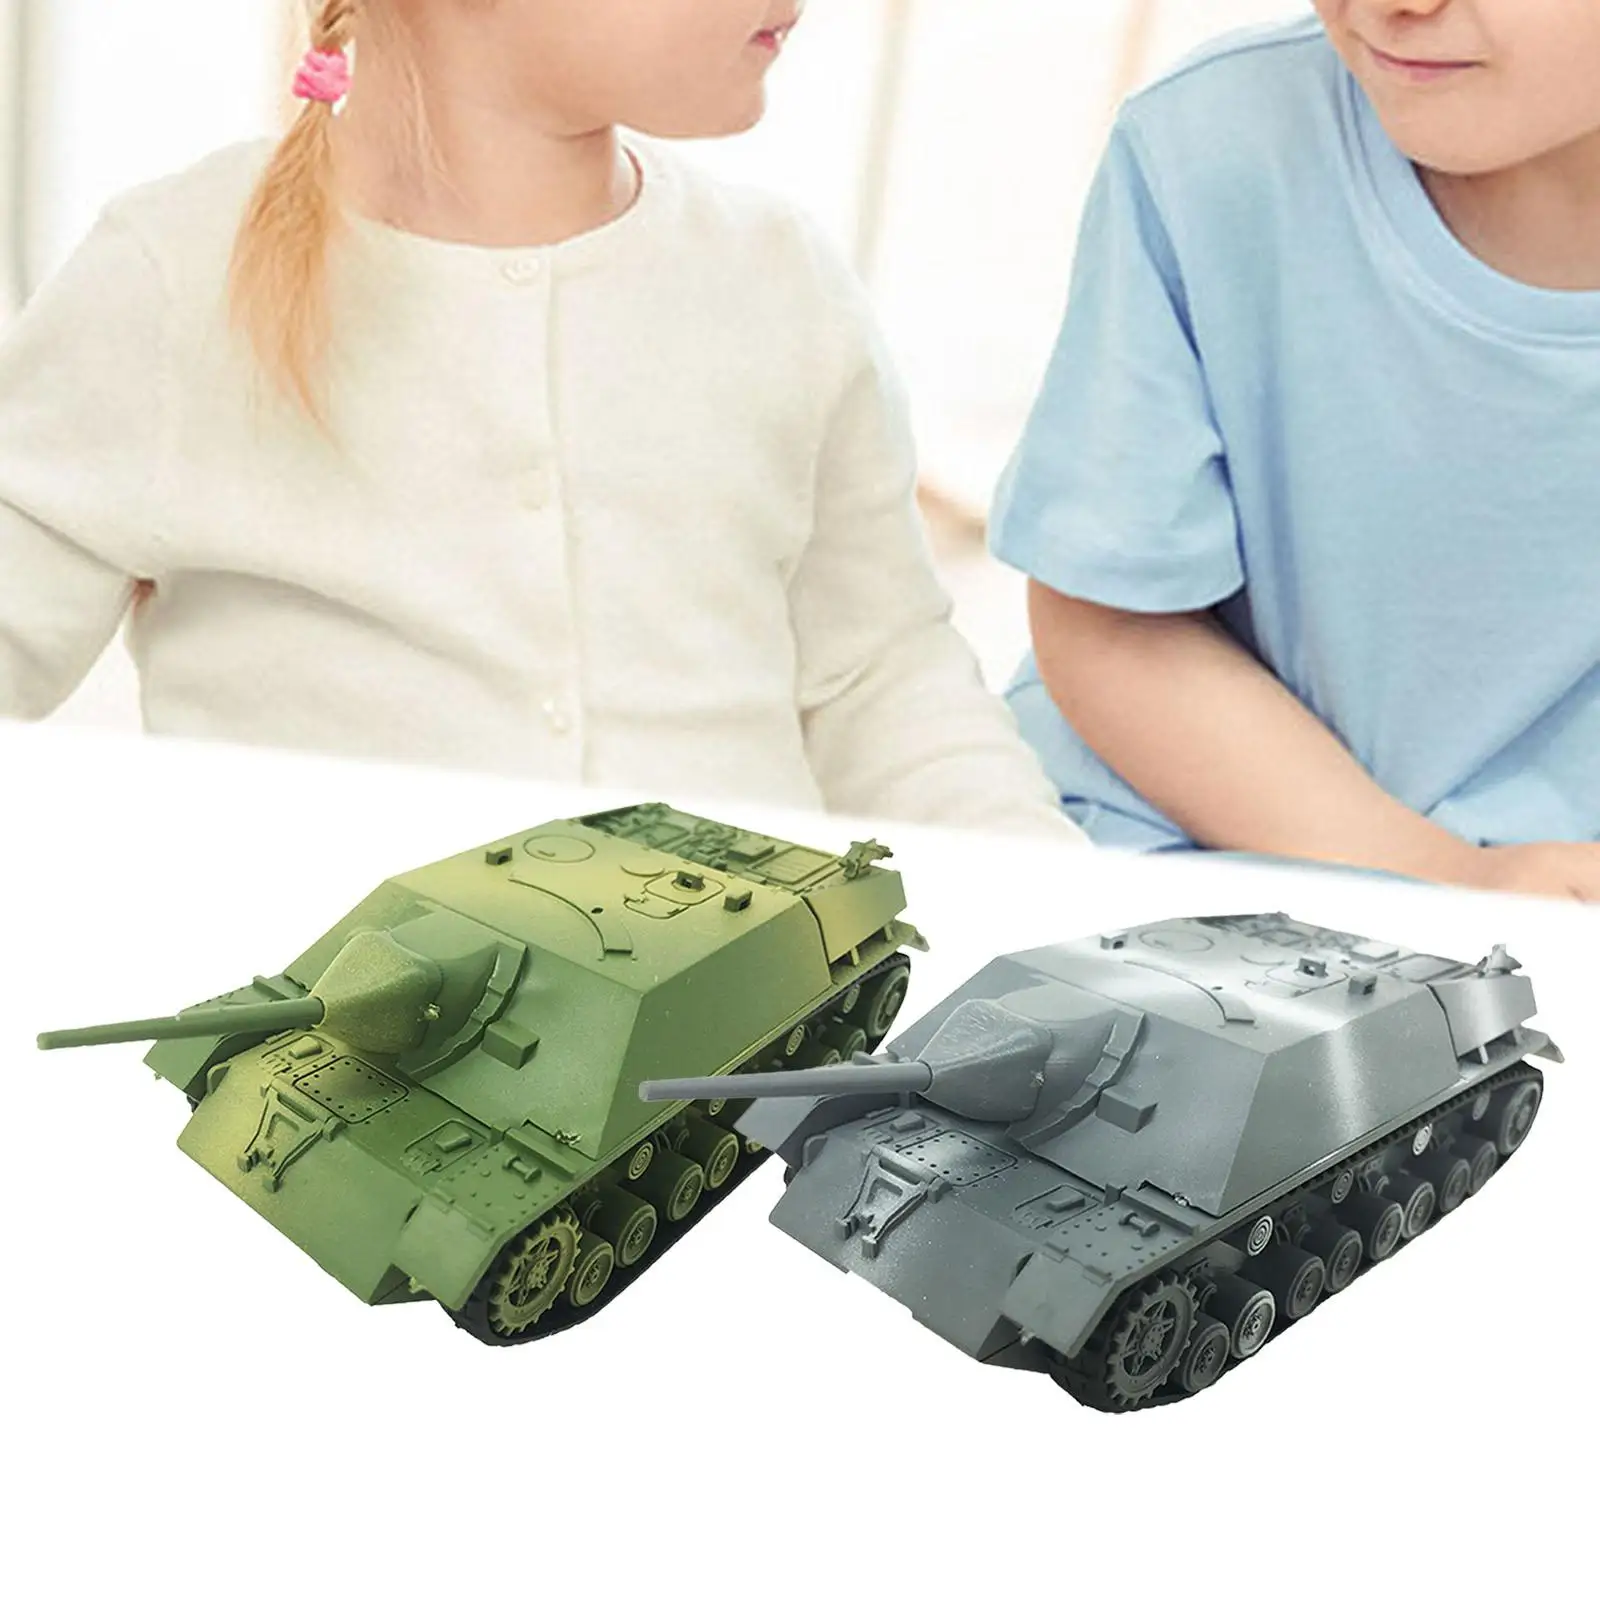 1/72 Tank Model 4D Model Puzzles Toy DIY Tank Puzzle DIY Assemble Tank Toy Model Building Kit for Adults Kids Boy Birthday Gift